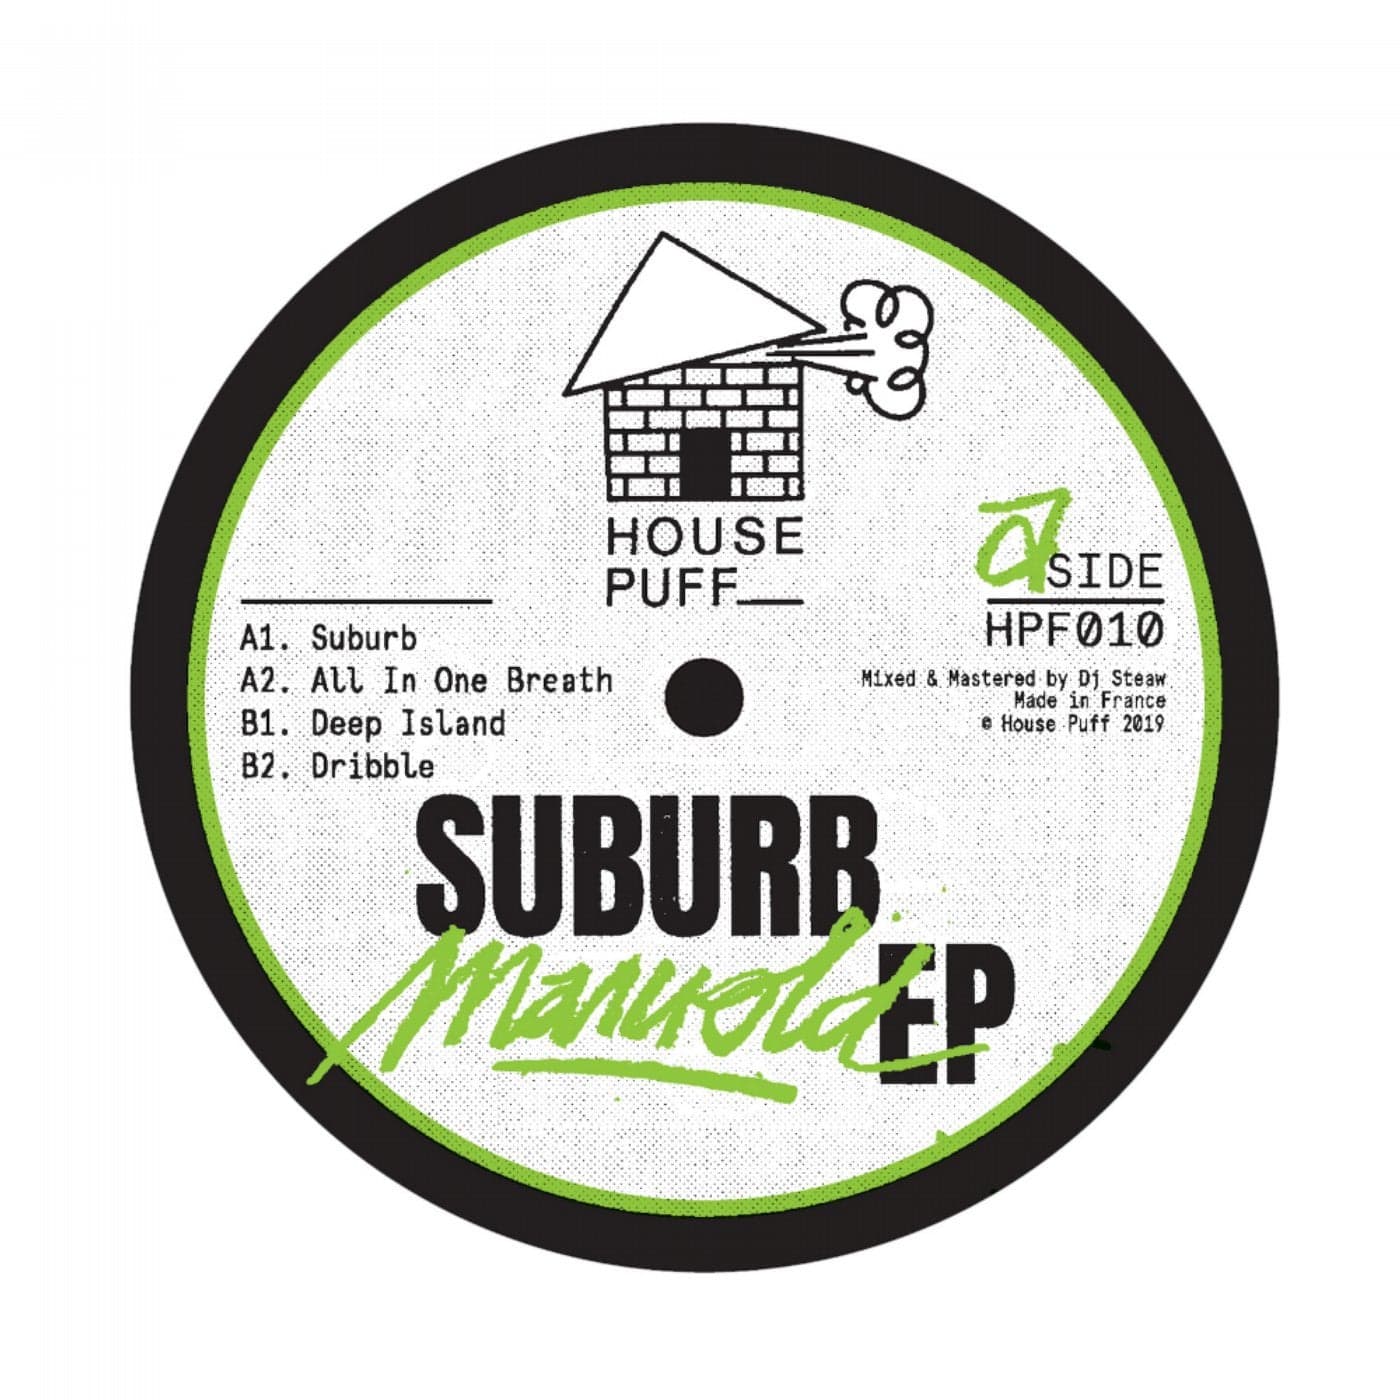 Download Manuold - Suburb EP on Electrobuzz